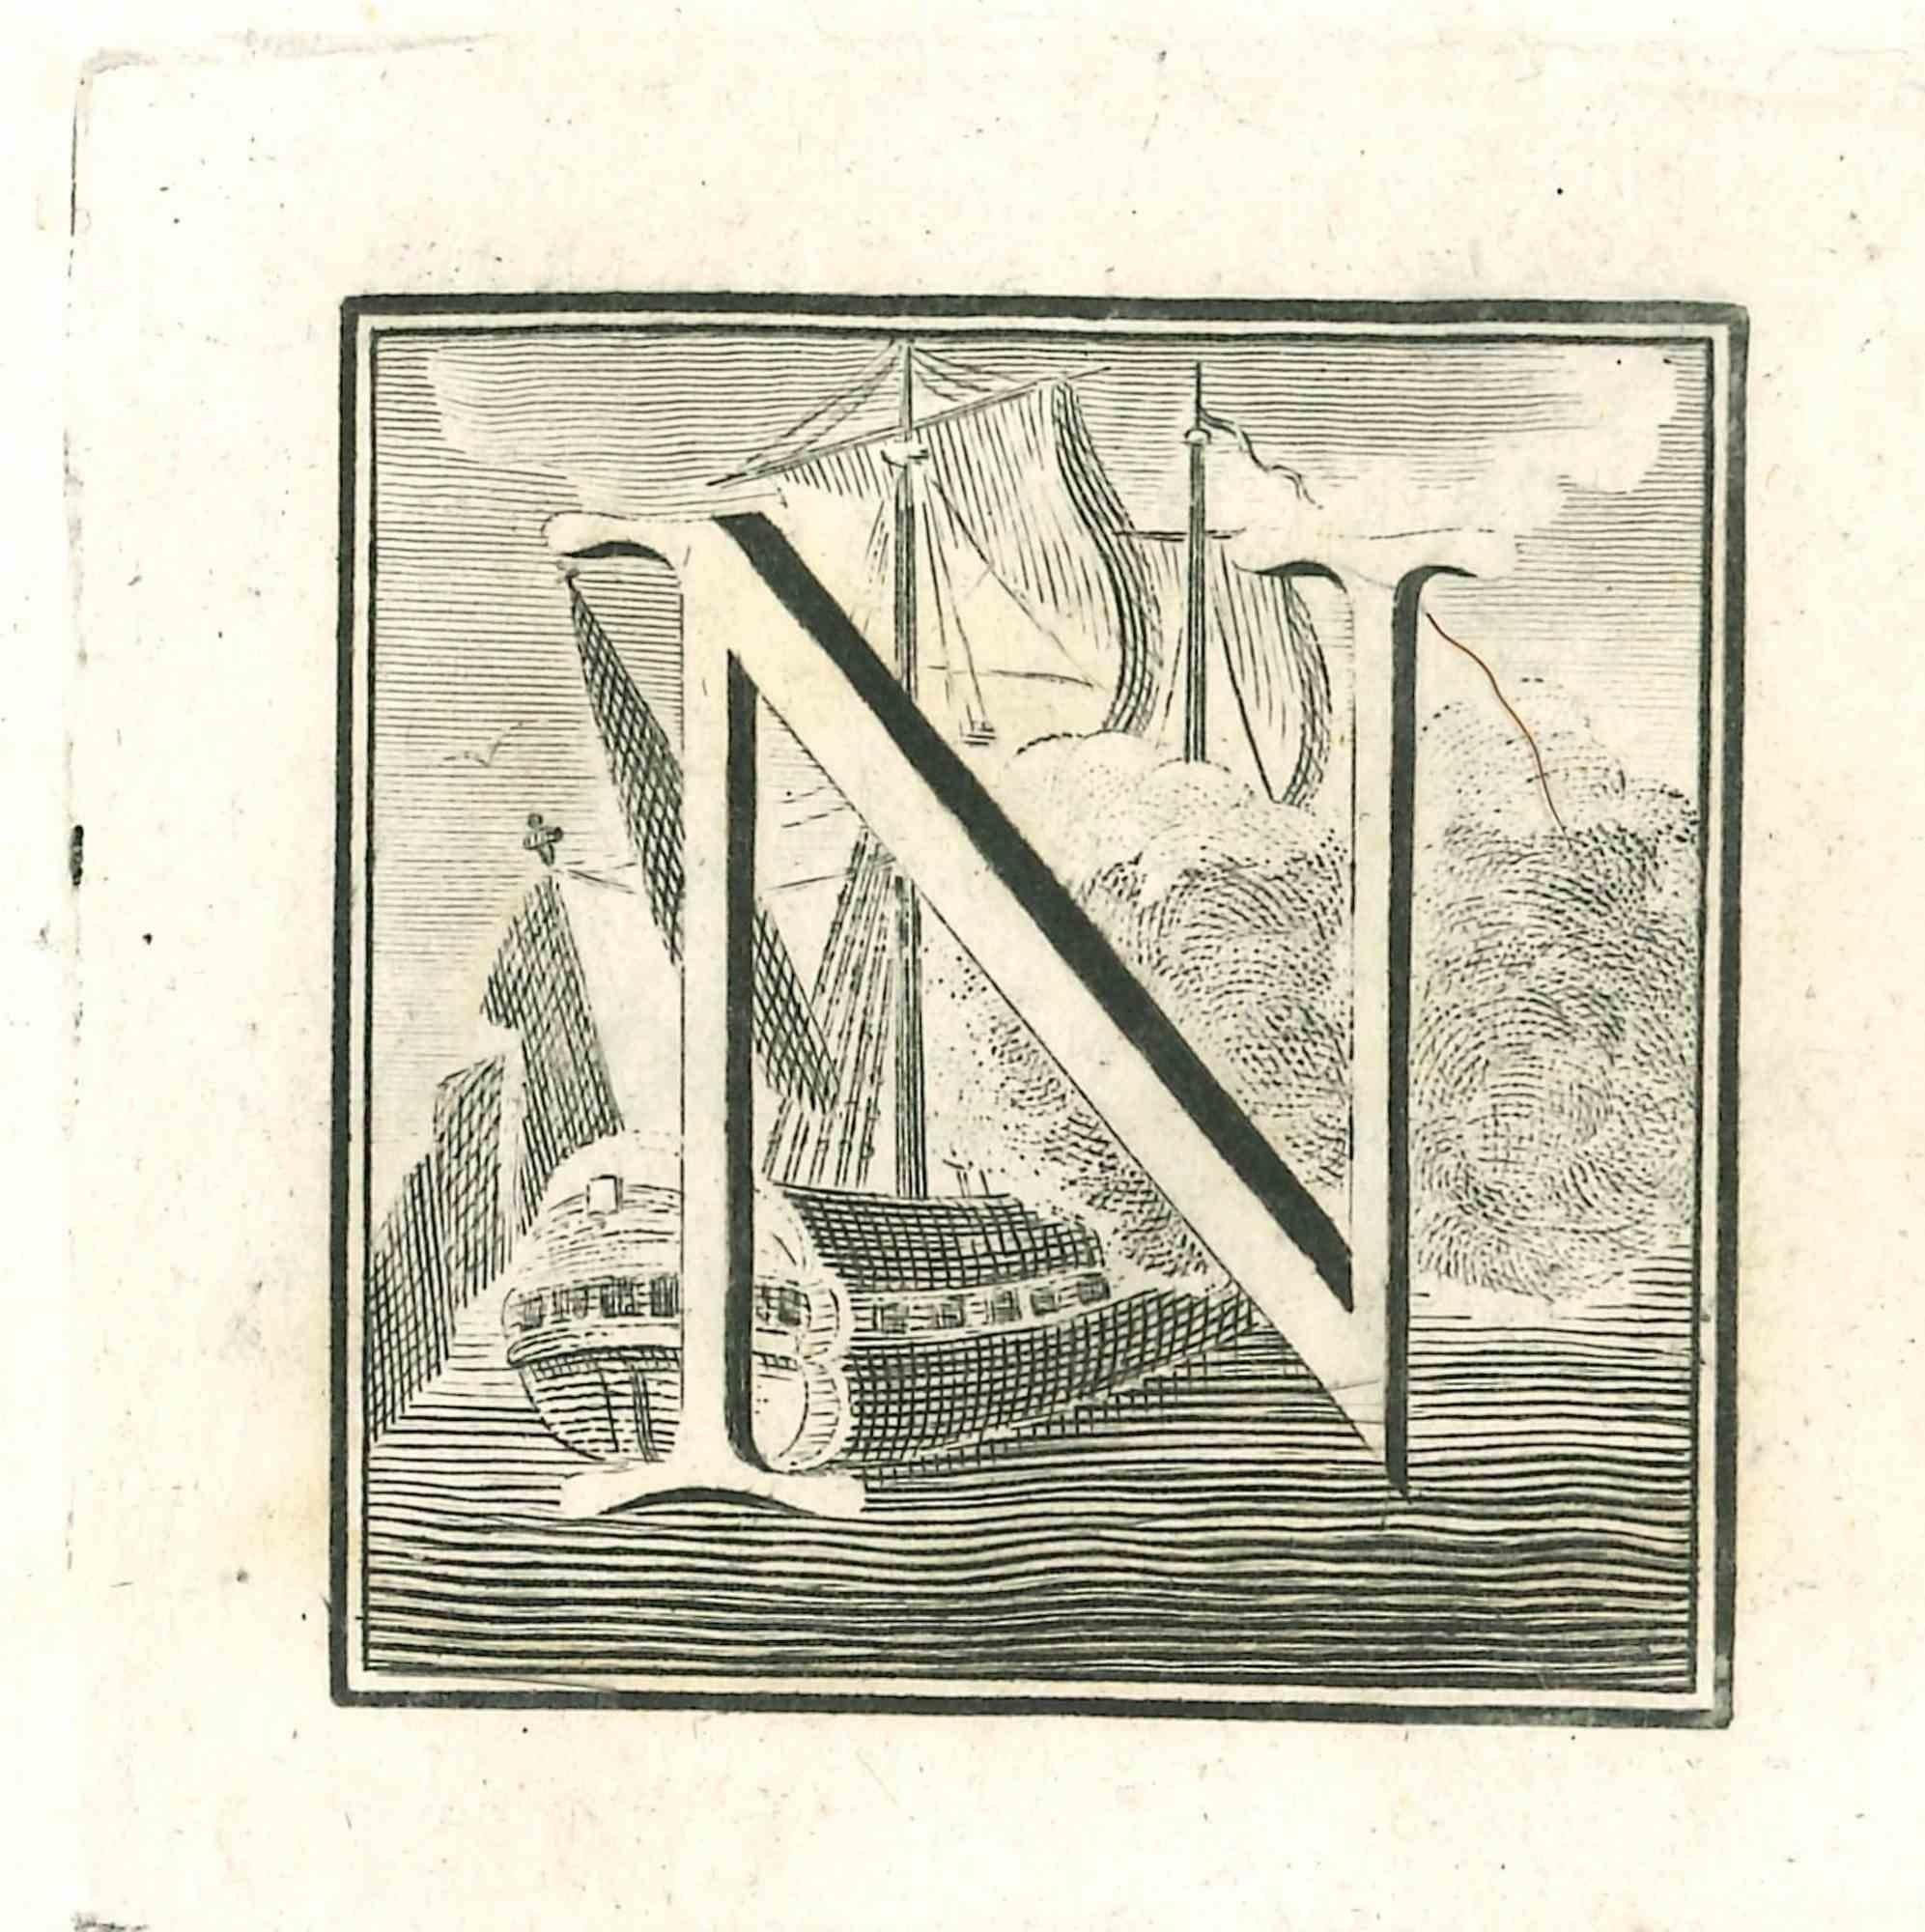 Unknown Figurative Print - Capital letter N - the Antiquities of Herculaneum Exposed-Etching - 18th Century